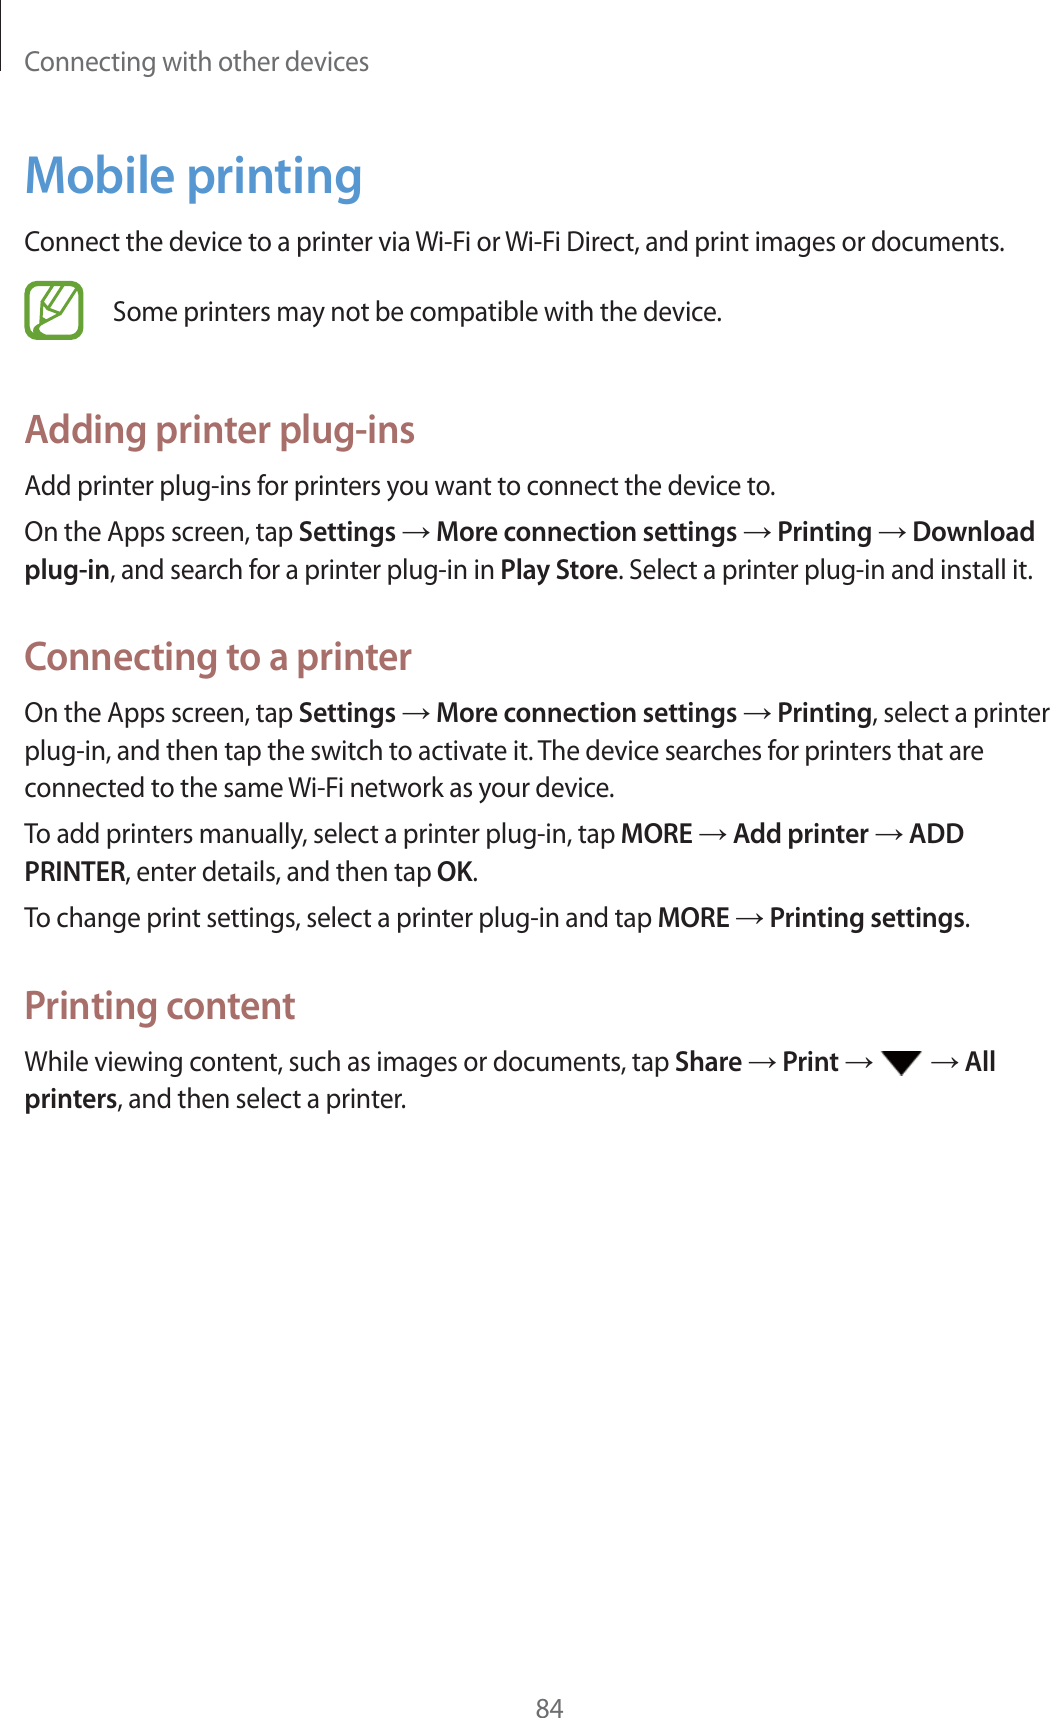 Connecting with other devices84Mobile printingConnect the device to a printer via Wi-Fi or Wi-Fi Direct, and print images or documents.Some printers may not be compatible with the device.Adding printer plug-insAdd printer plug-ins for printers you want to connect the device to.On the Apps screen, tap Settings ĺ More connection settings ĺ Printing ĺ Download plug-in, and search for a printer plug-in in Play Store. Select a printer plug-in and install it.Connecting to a printerOn the Apps screen, tap Settings ĺ More connection settings ĺ Printing, select a printer plug-in, and then tap the switch to activate it. The device searches for printers that are connected to the same Wi-Fi network as your device.To add printers manually, select a printer plug-in, tap MORE ĺ Add printer ĺ ADD PRINTER, enter details, and then tap OK.To change print settings, select a printer plug-in and tap MORE ĺ Printing settings.Printing contentWhile viewing content, such as images or documents, tap Share ĺ Print ĺ   ĺ All printers, and then select a printer.